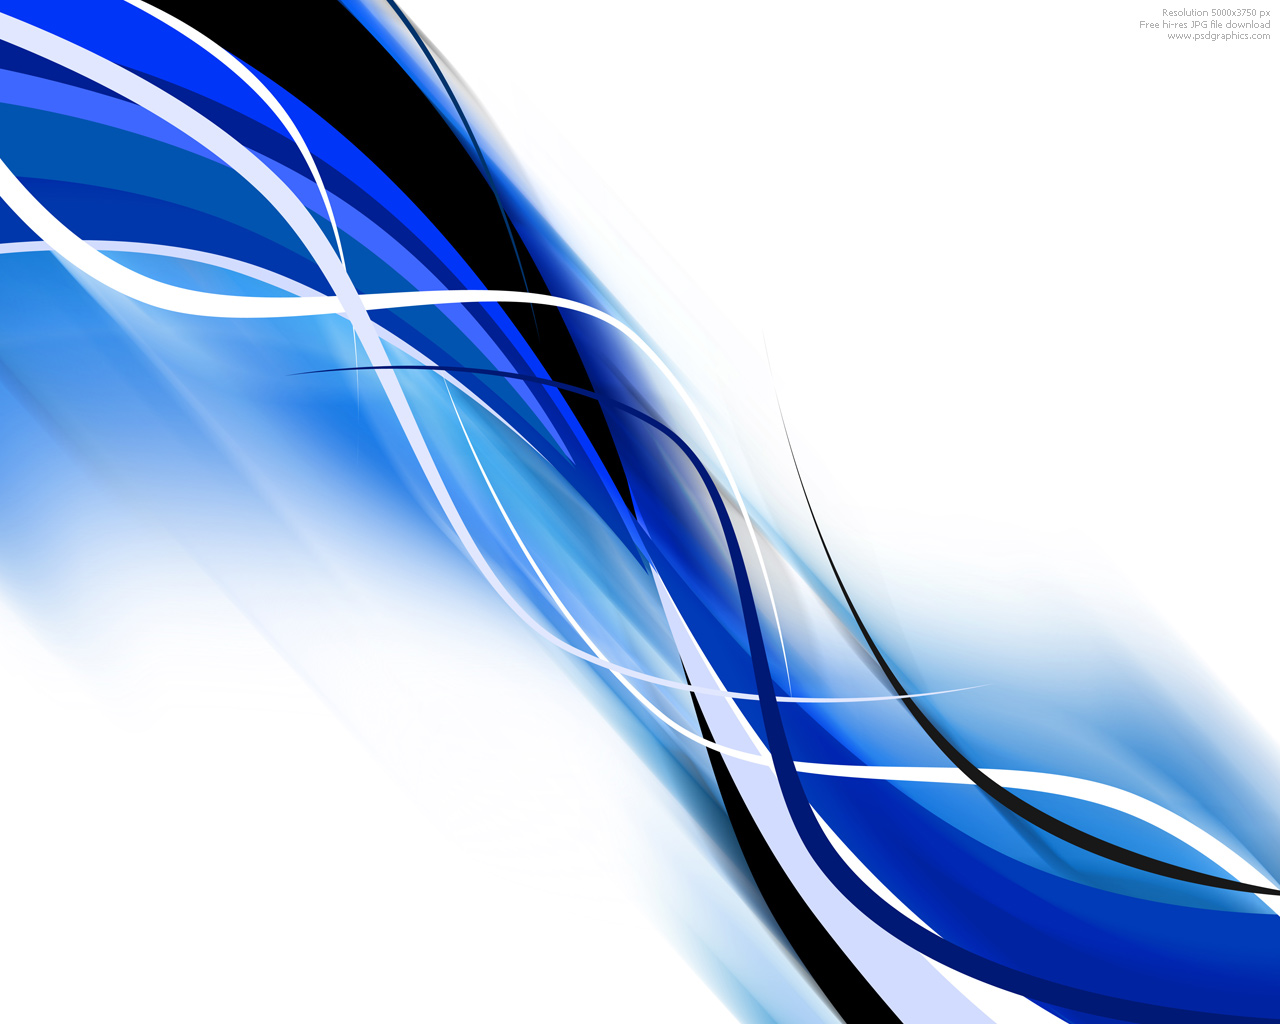 Cool Red and Blue Abstract Background Designs